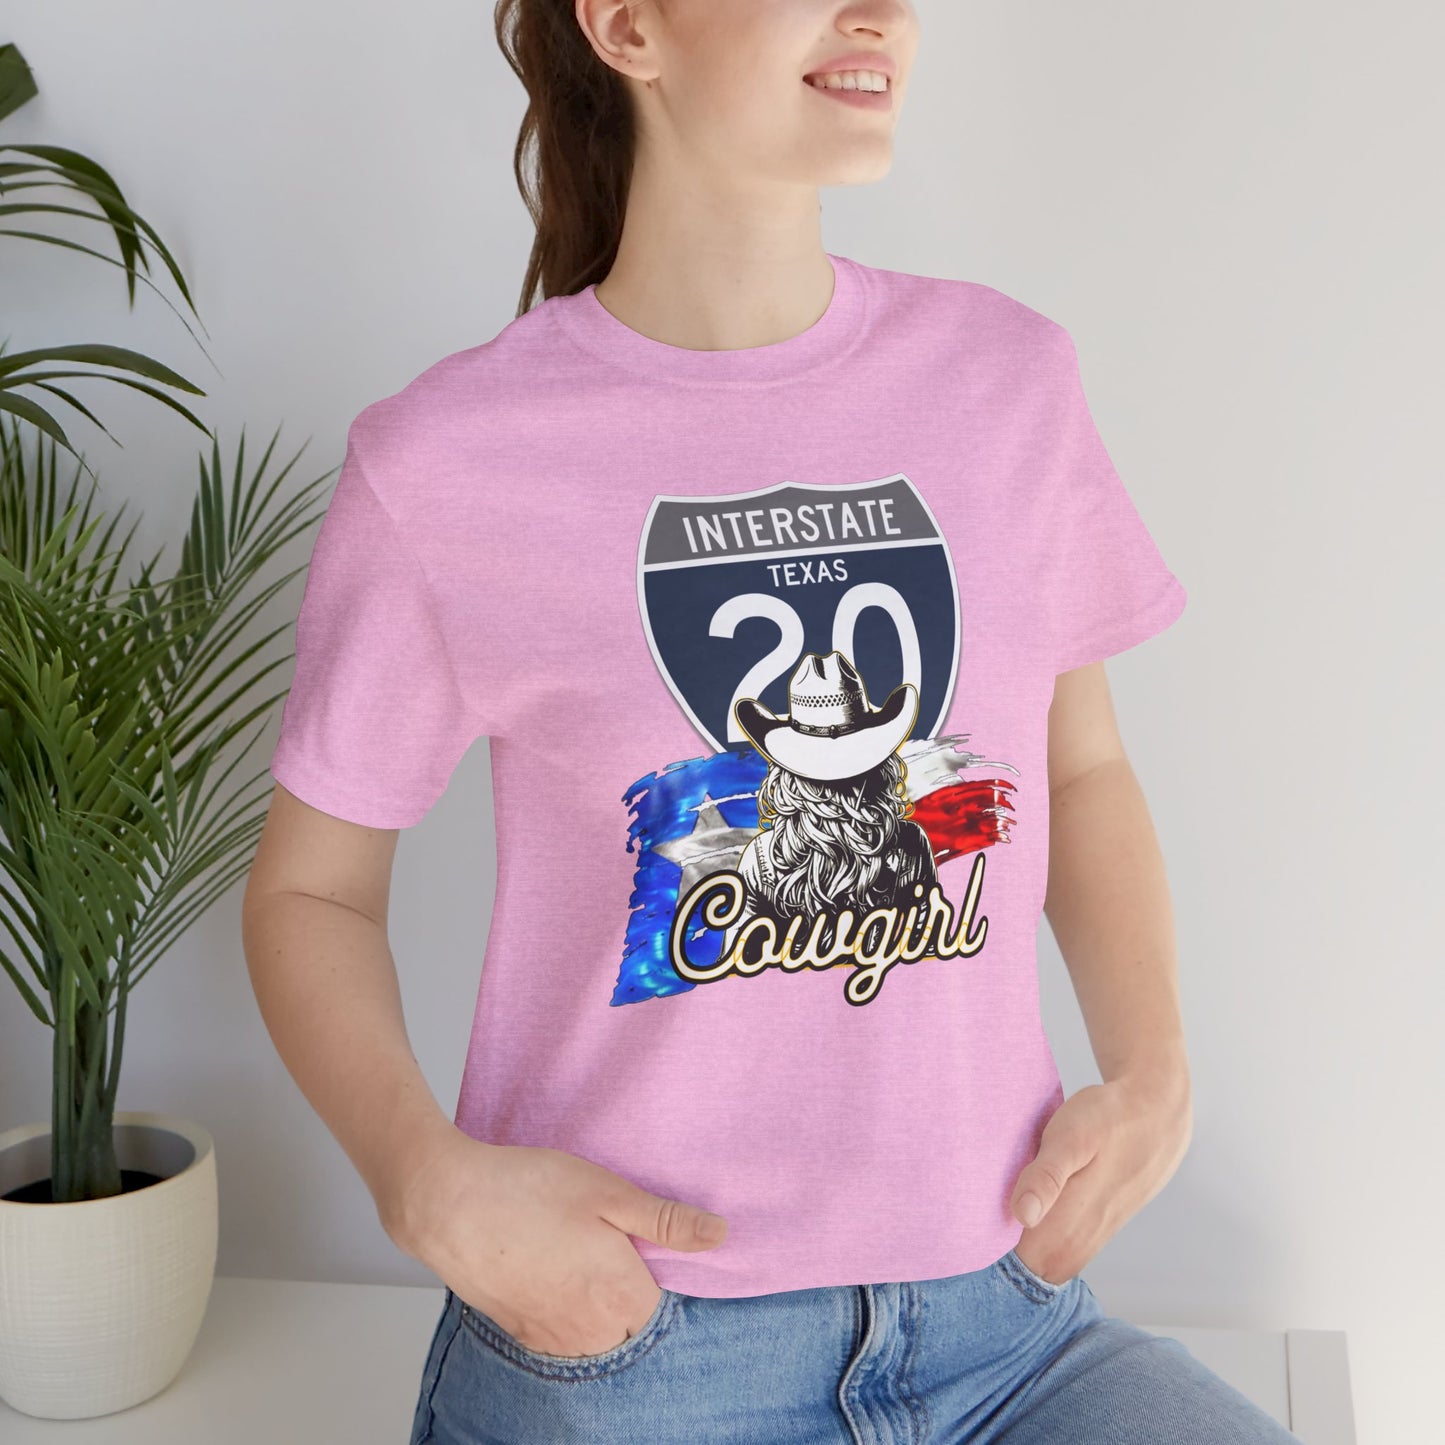 Interstate 20 Texas Cowgirl Highway Route Tee Shirt - Soft Blend T-Shirt